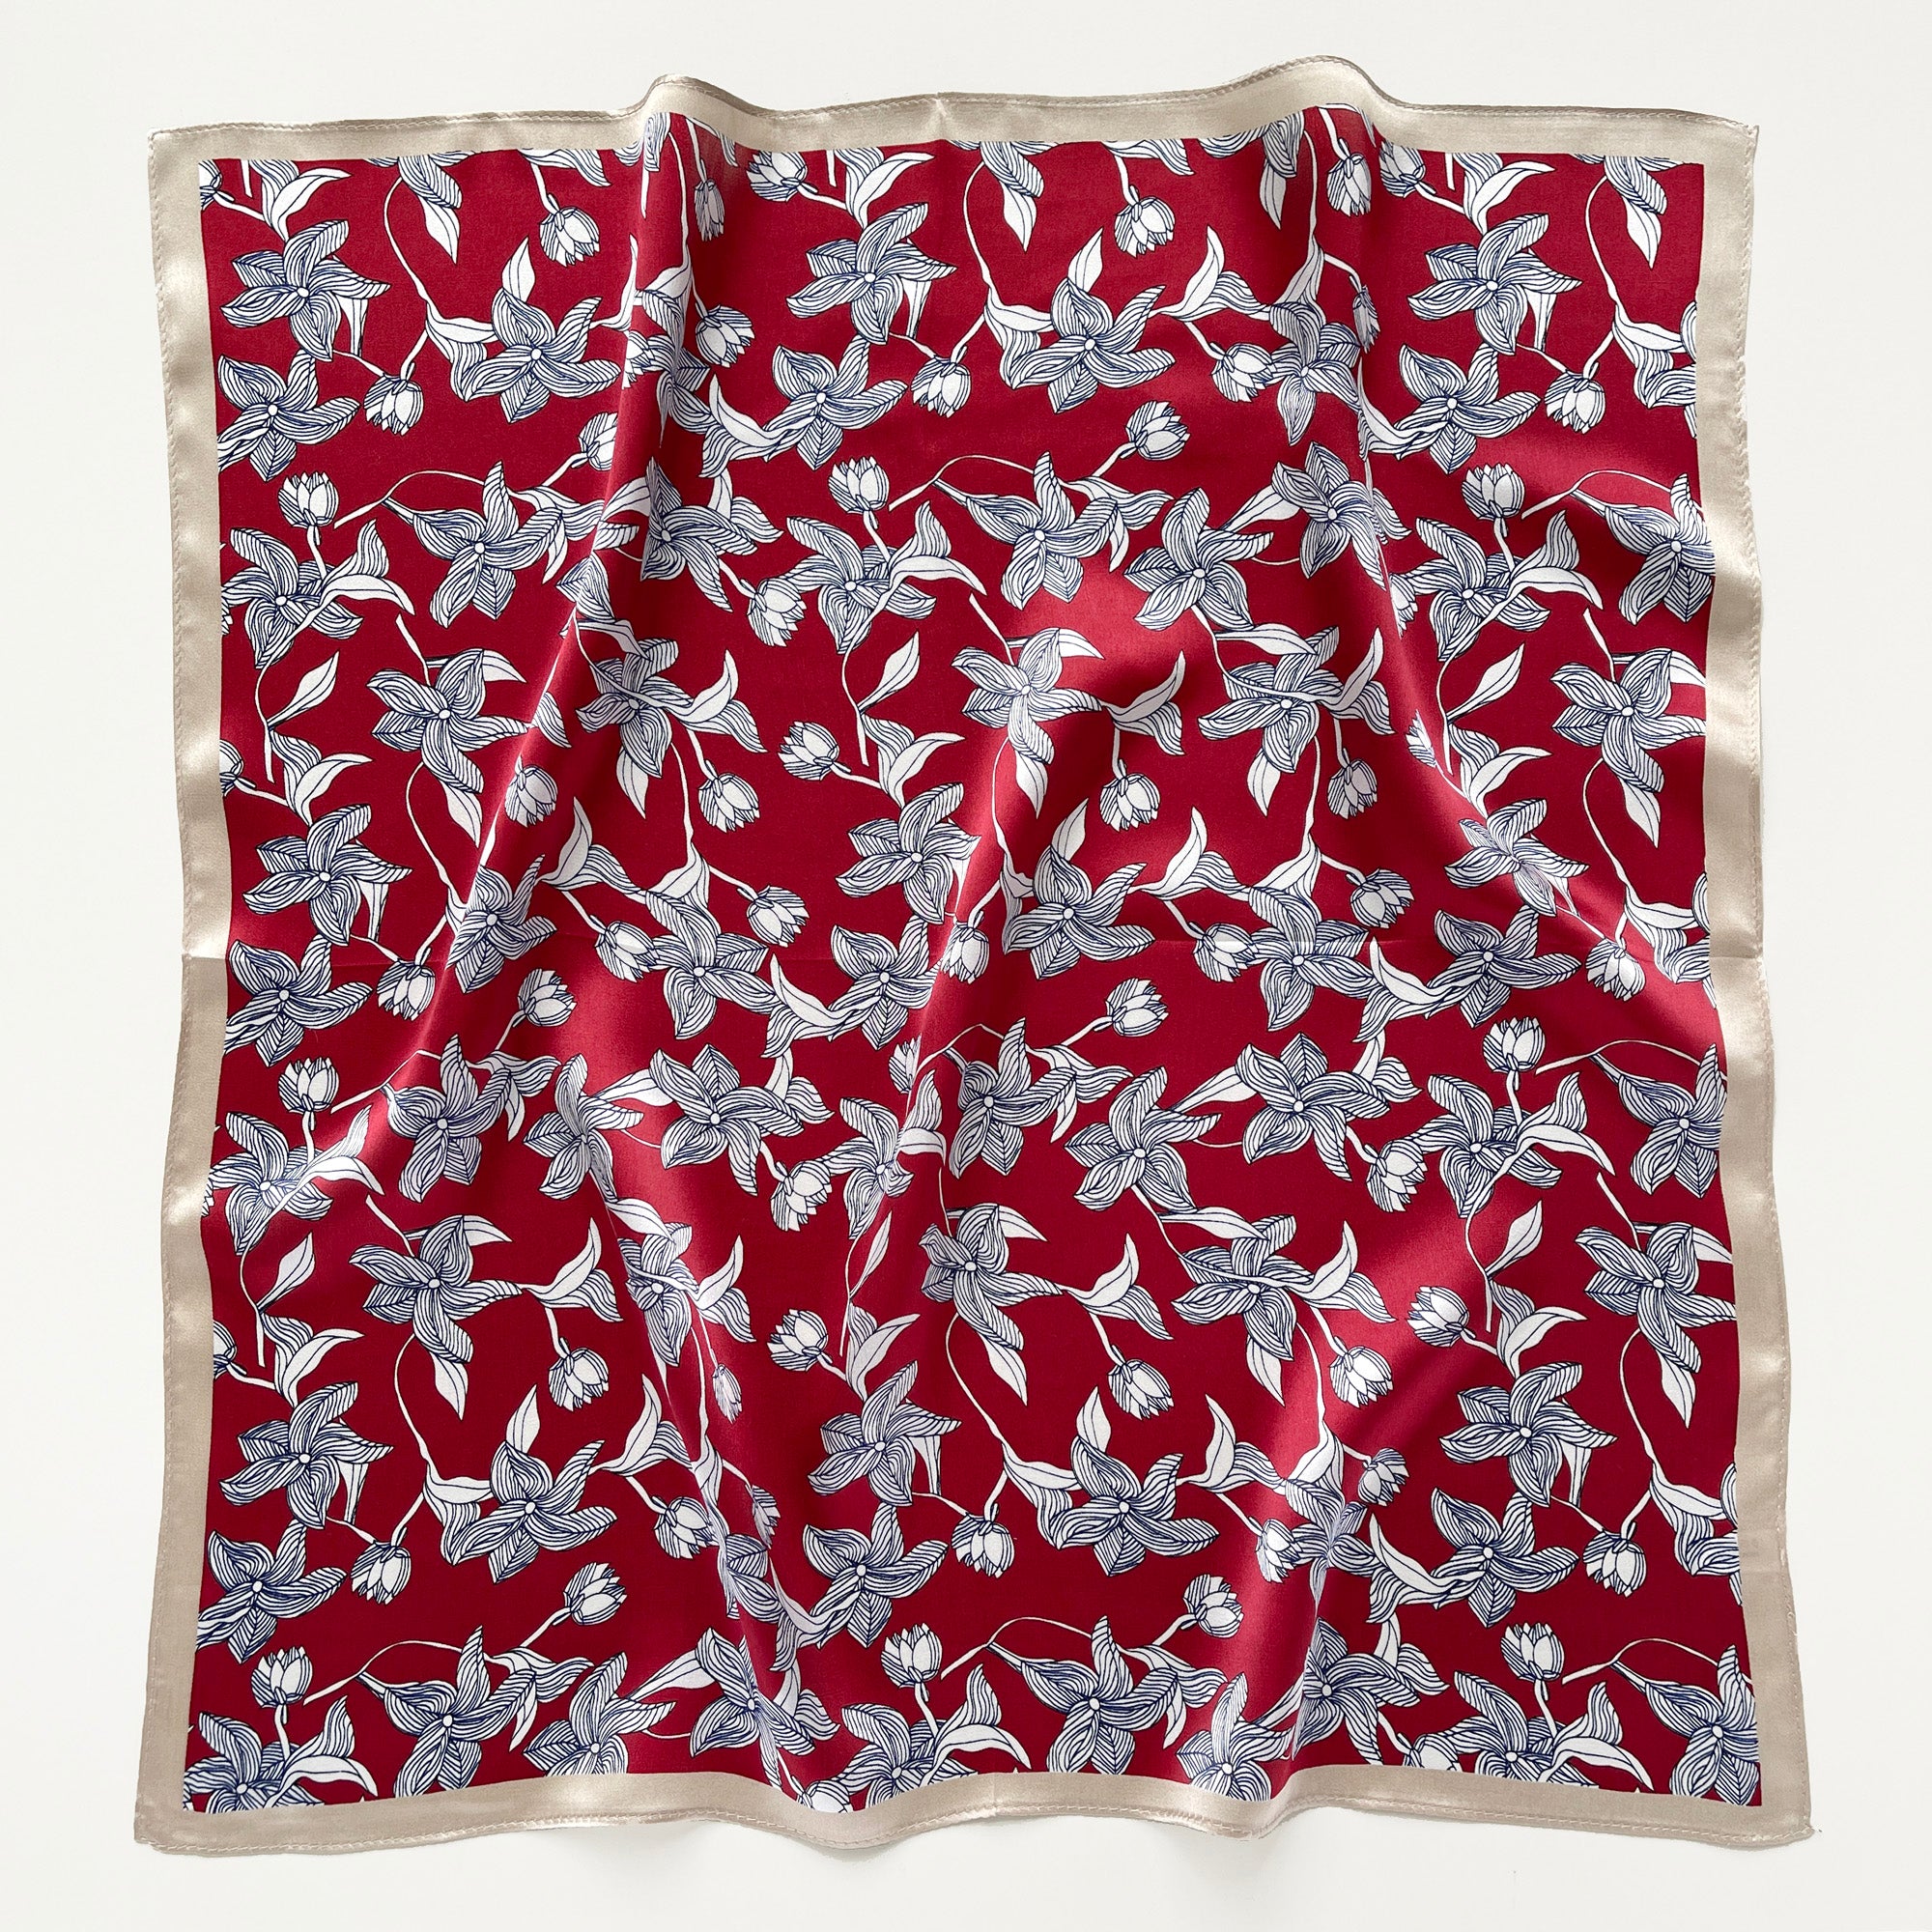 a burgundy red silk bandana scarf featuring floral print with light beige edge